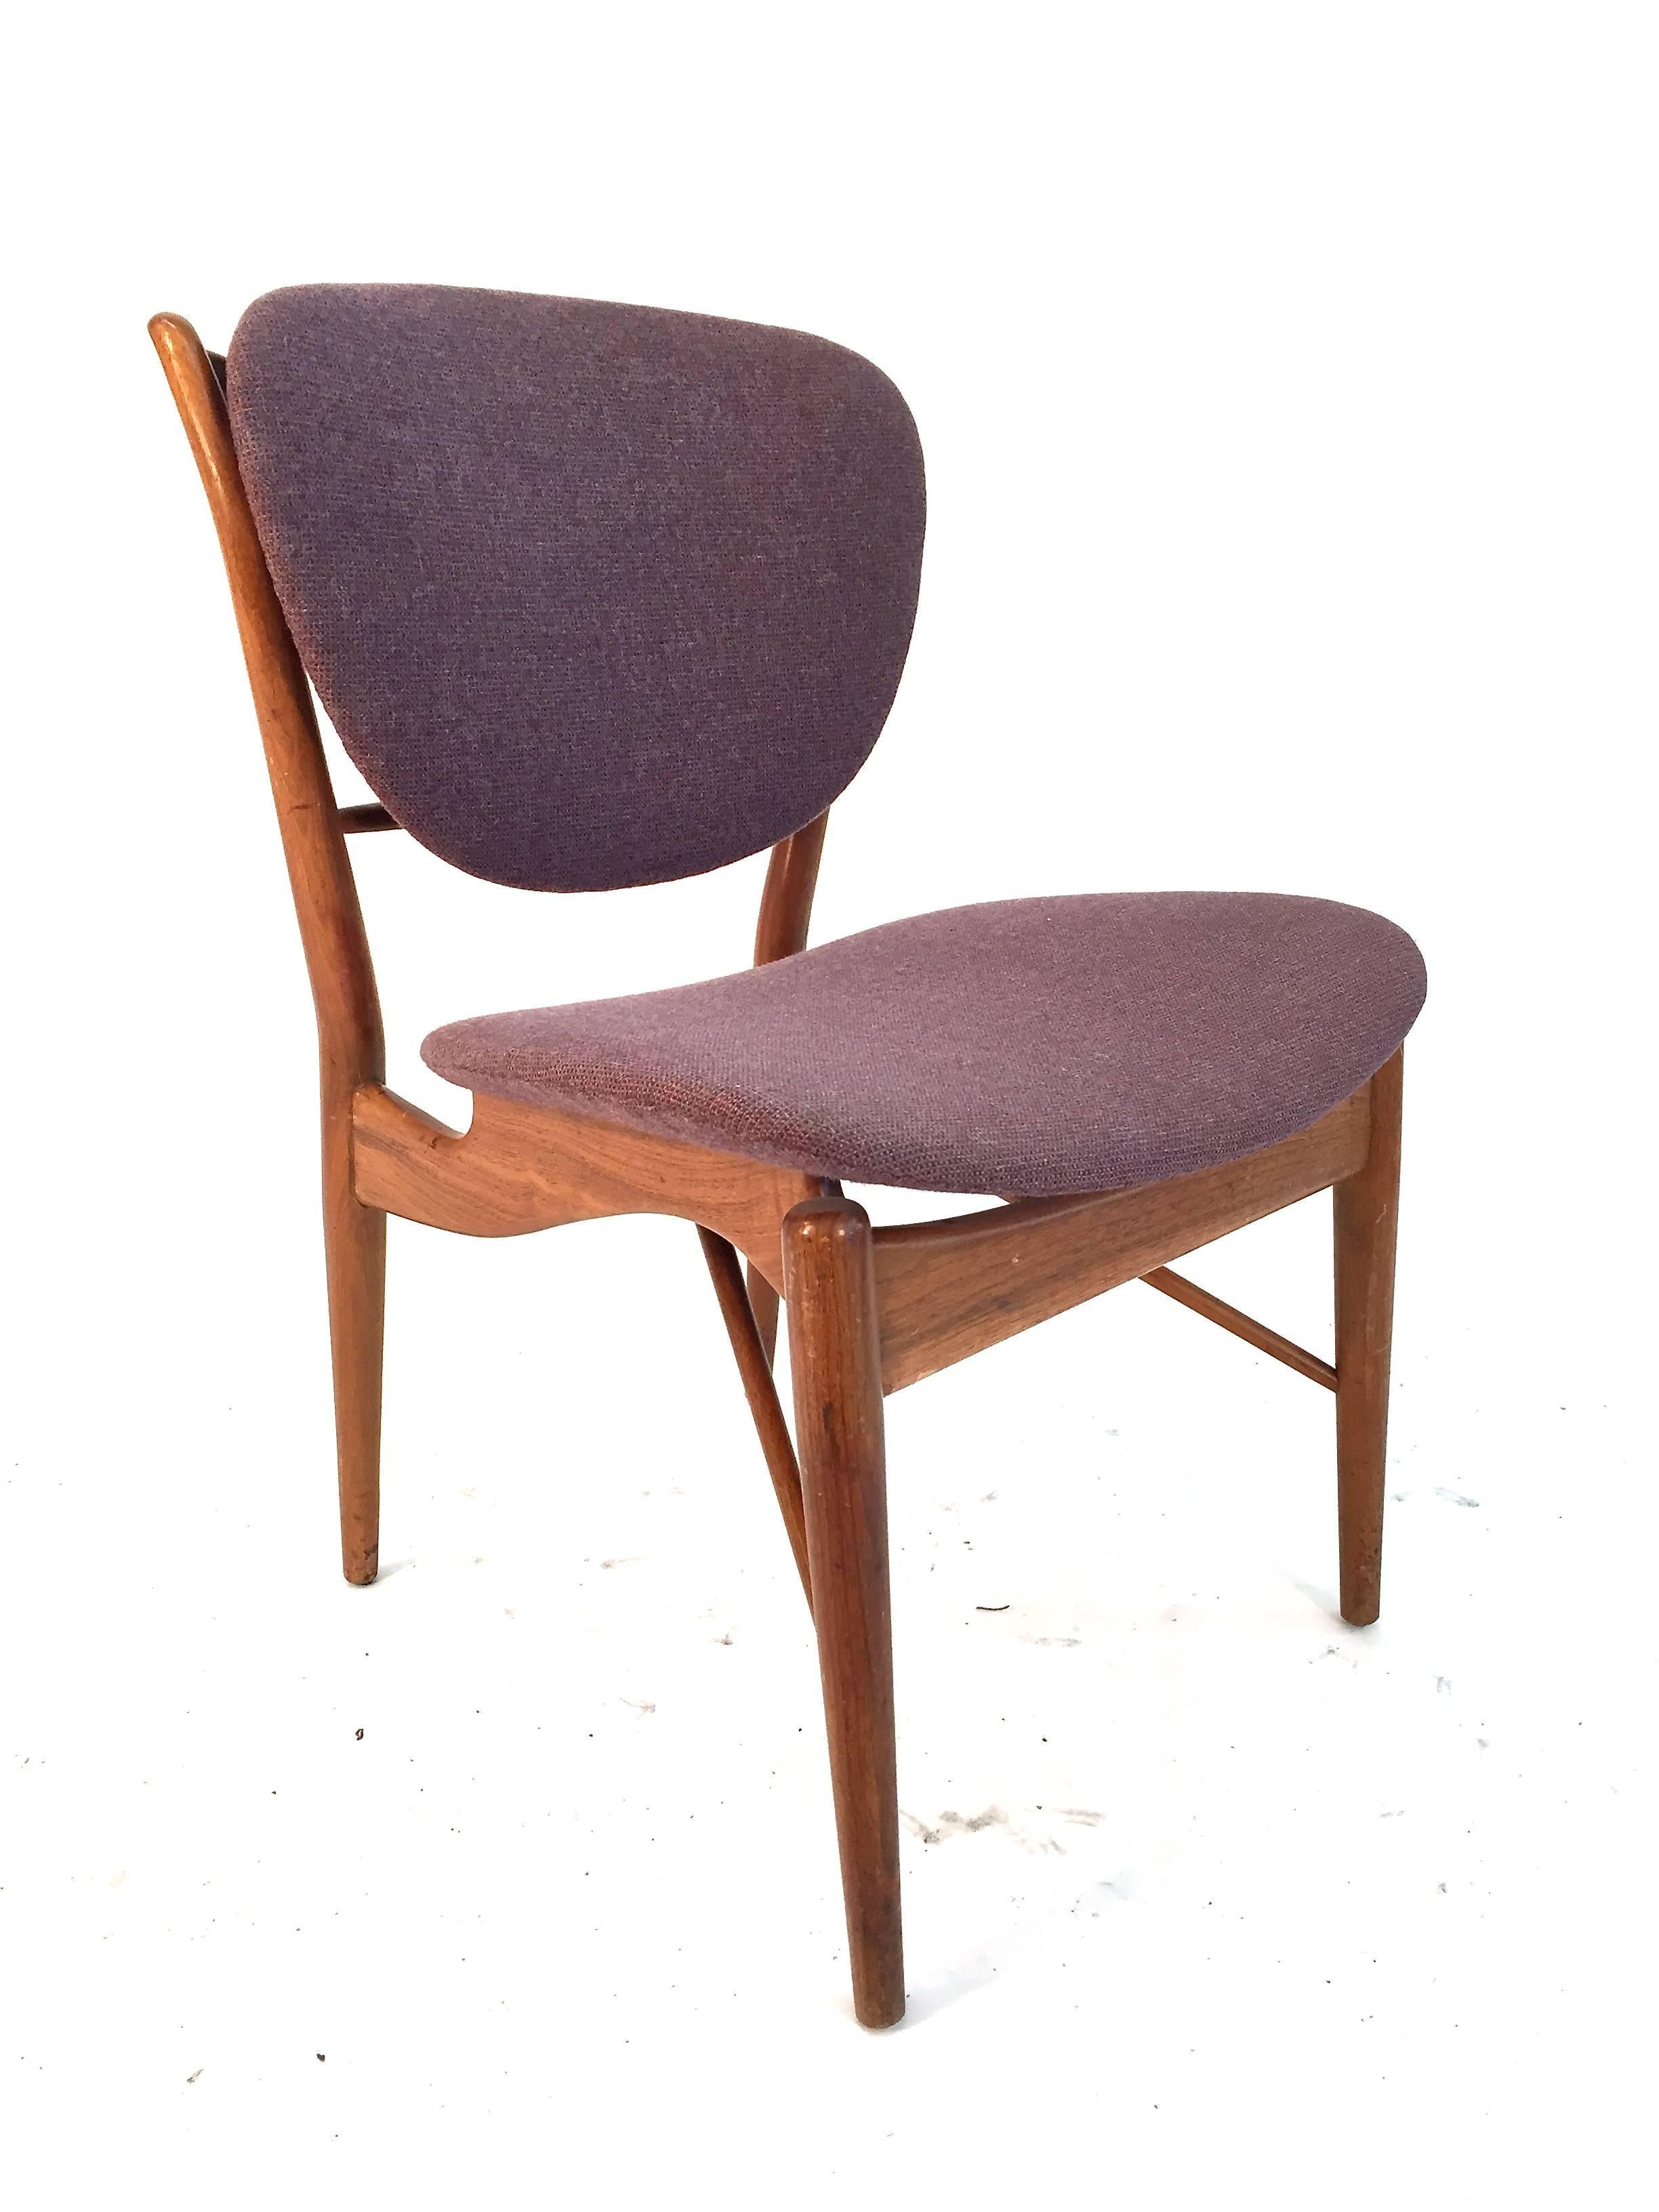 Finn Juhl Model Nv-51 Side Chair for Baker In Good Condition For Sale In Lake Success, NY